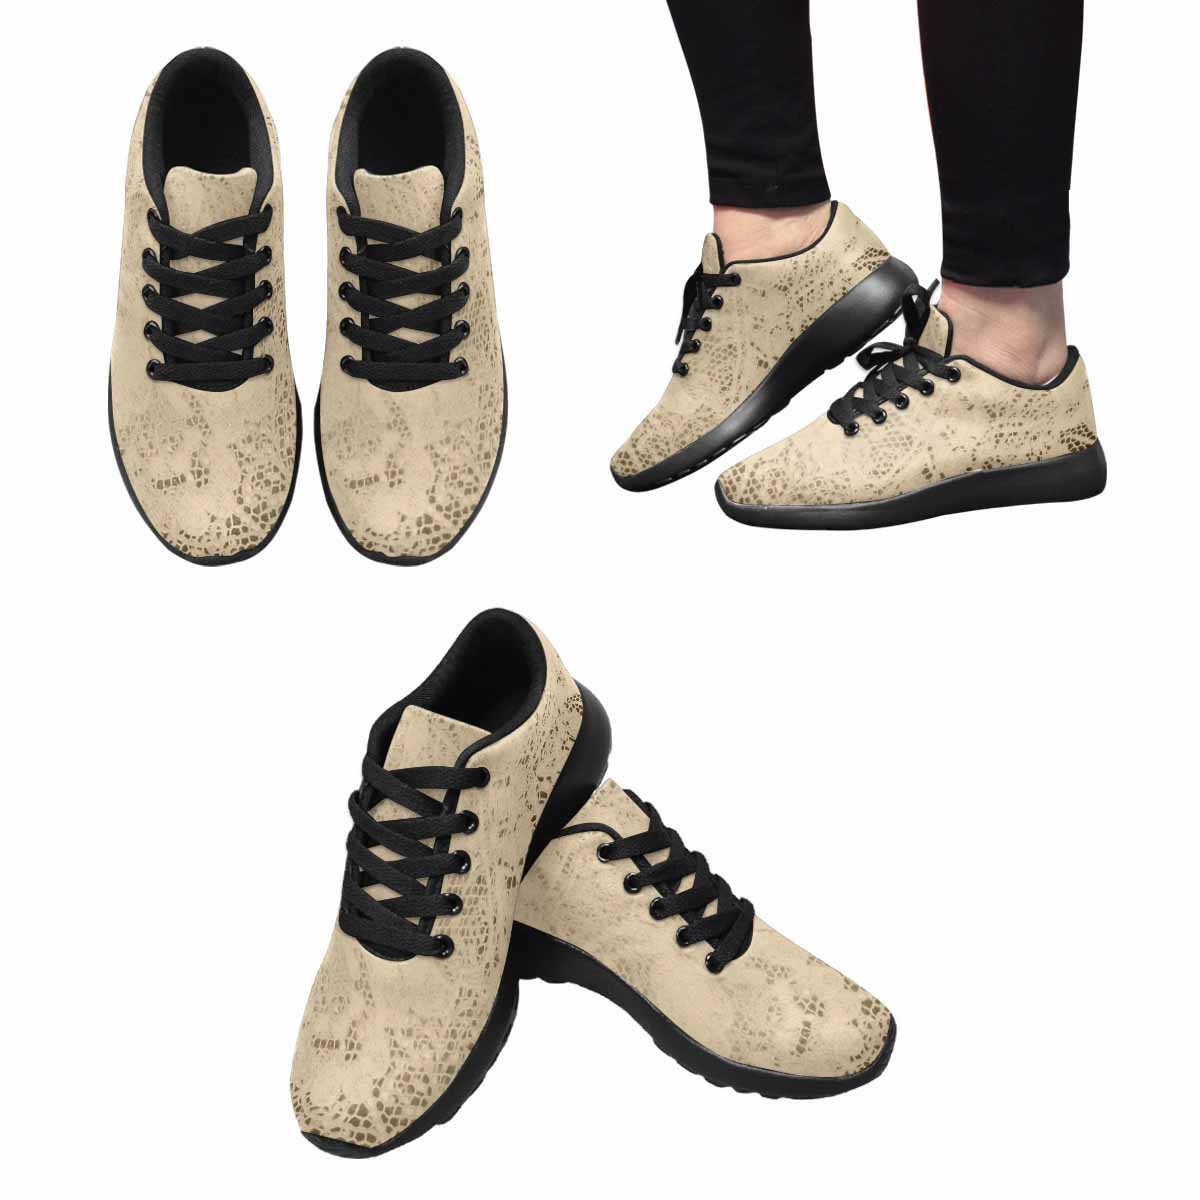 Victorian lace print, womens cute casual or running sneakers, design 26